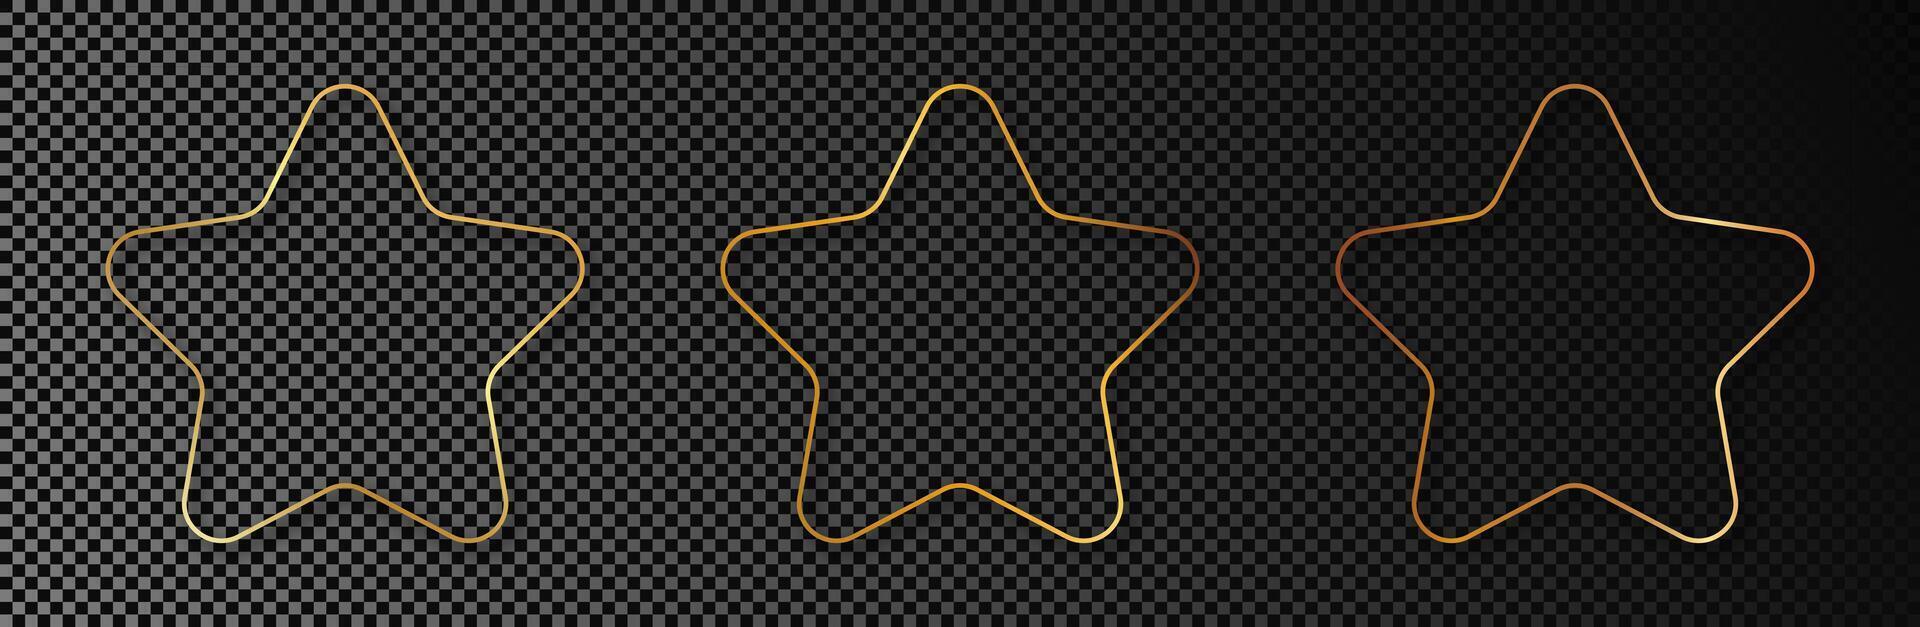 Gold glowing rounded star shape frame vector